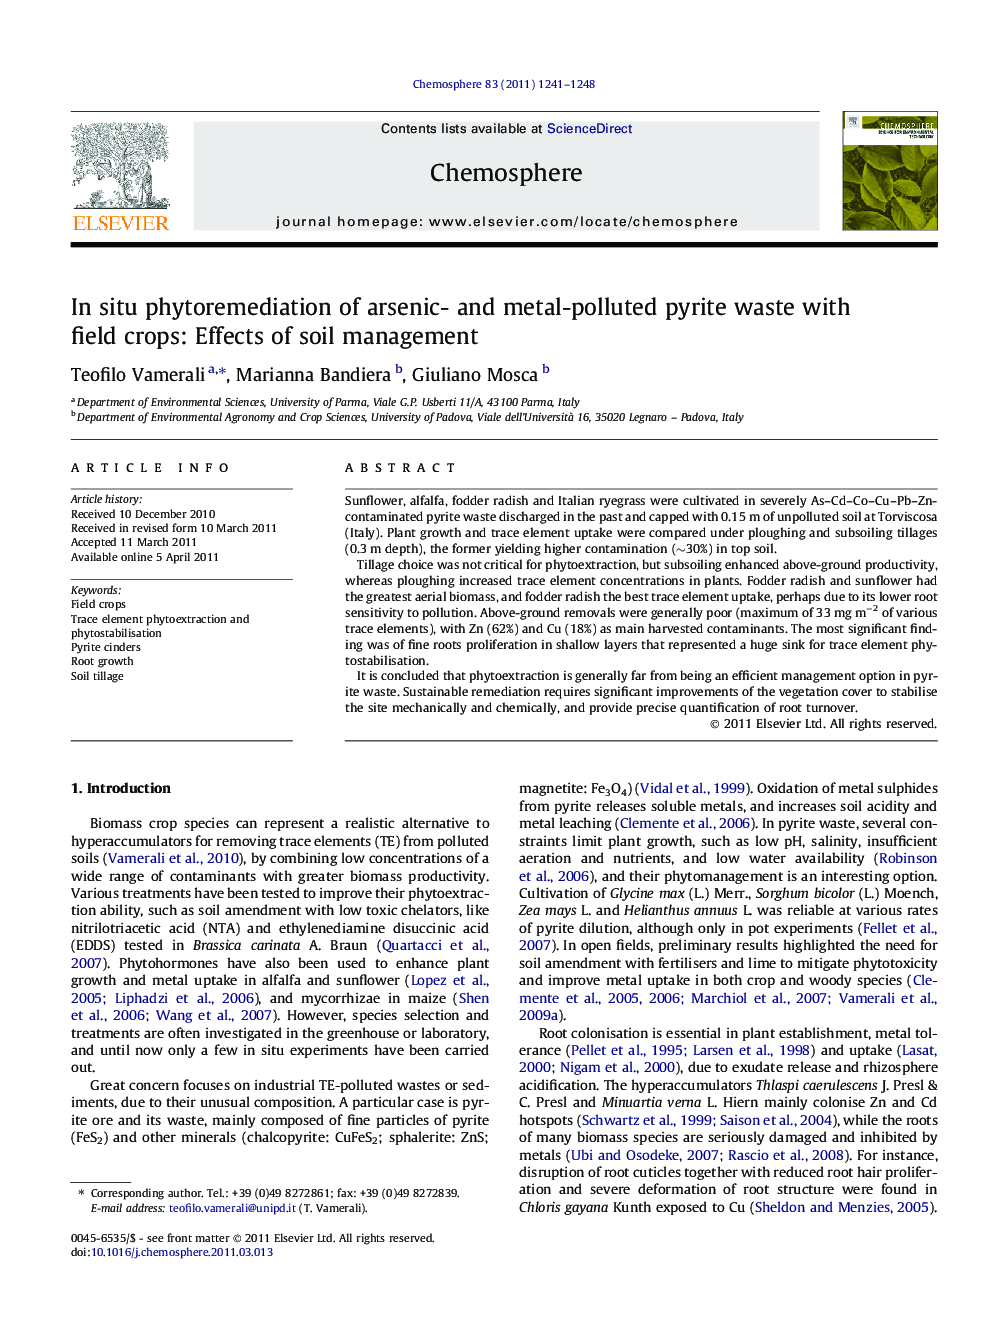 In situ phytoremediation of arsenic- and metal-polluted pyrite waste with field crops: Effects of soil management